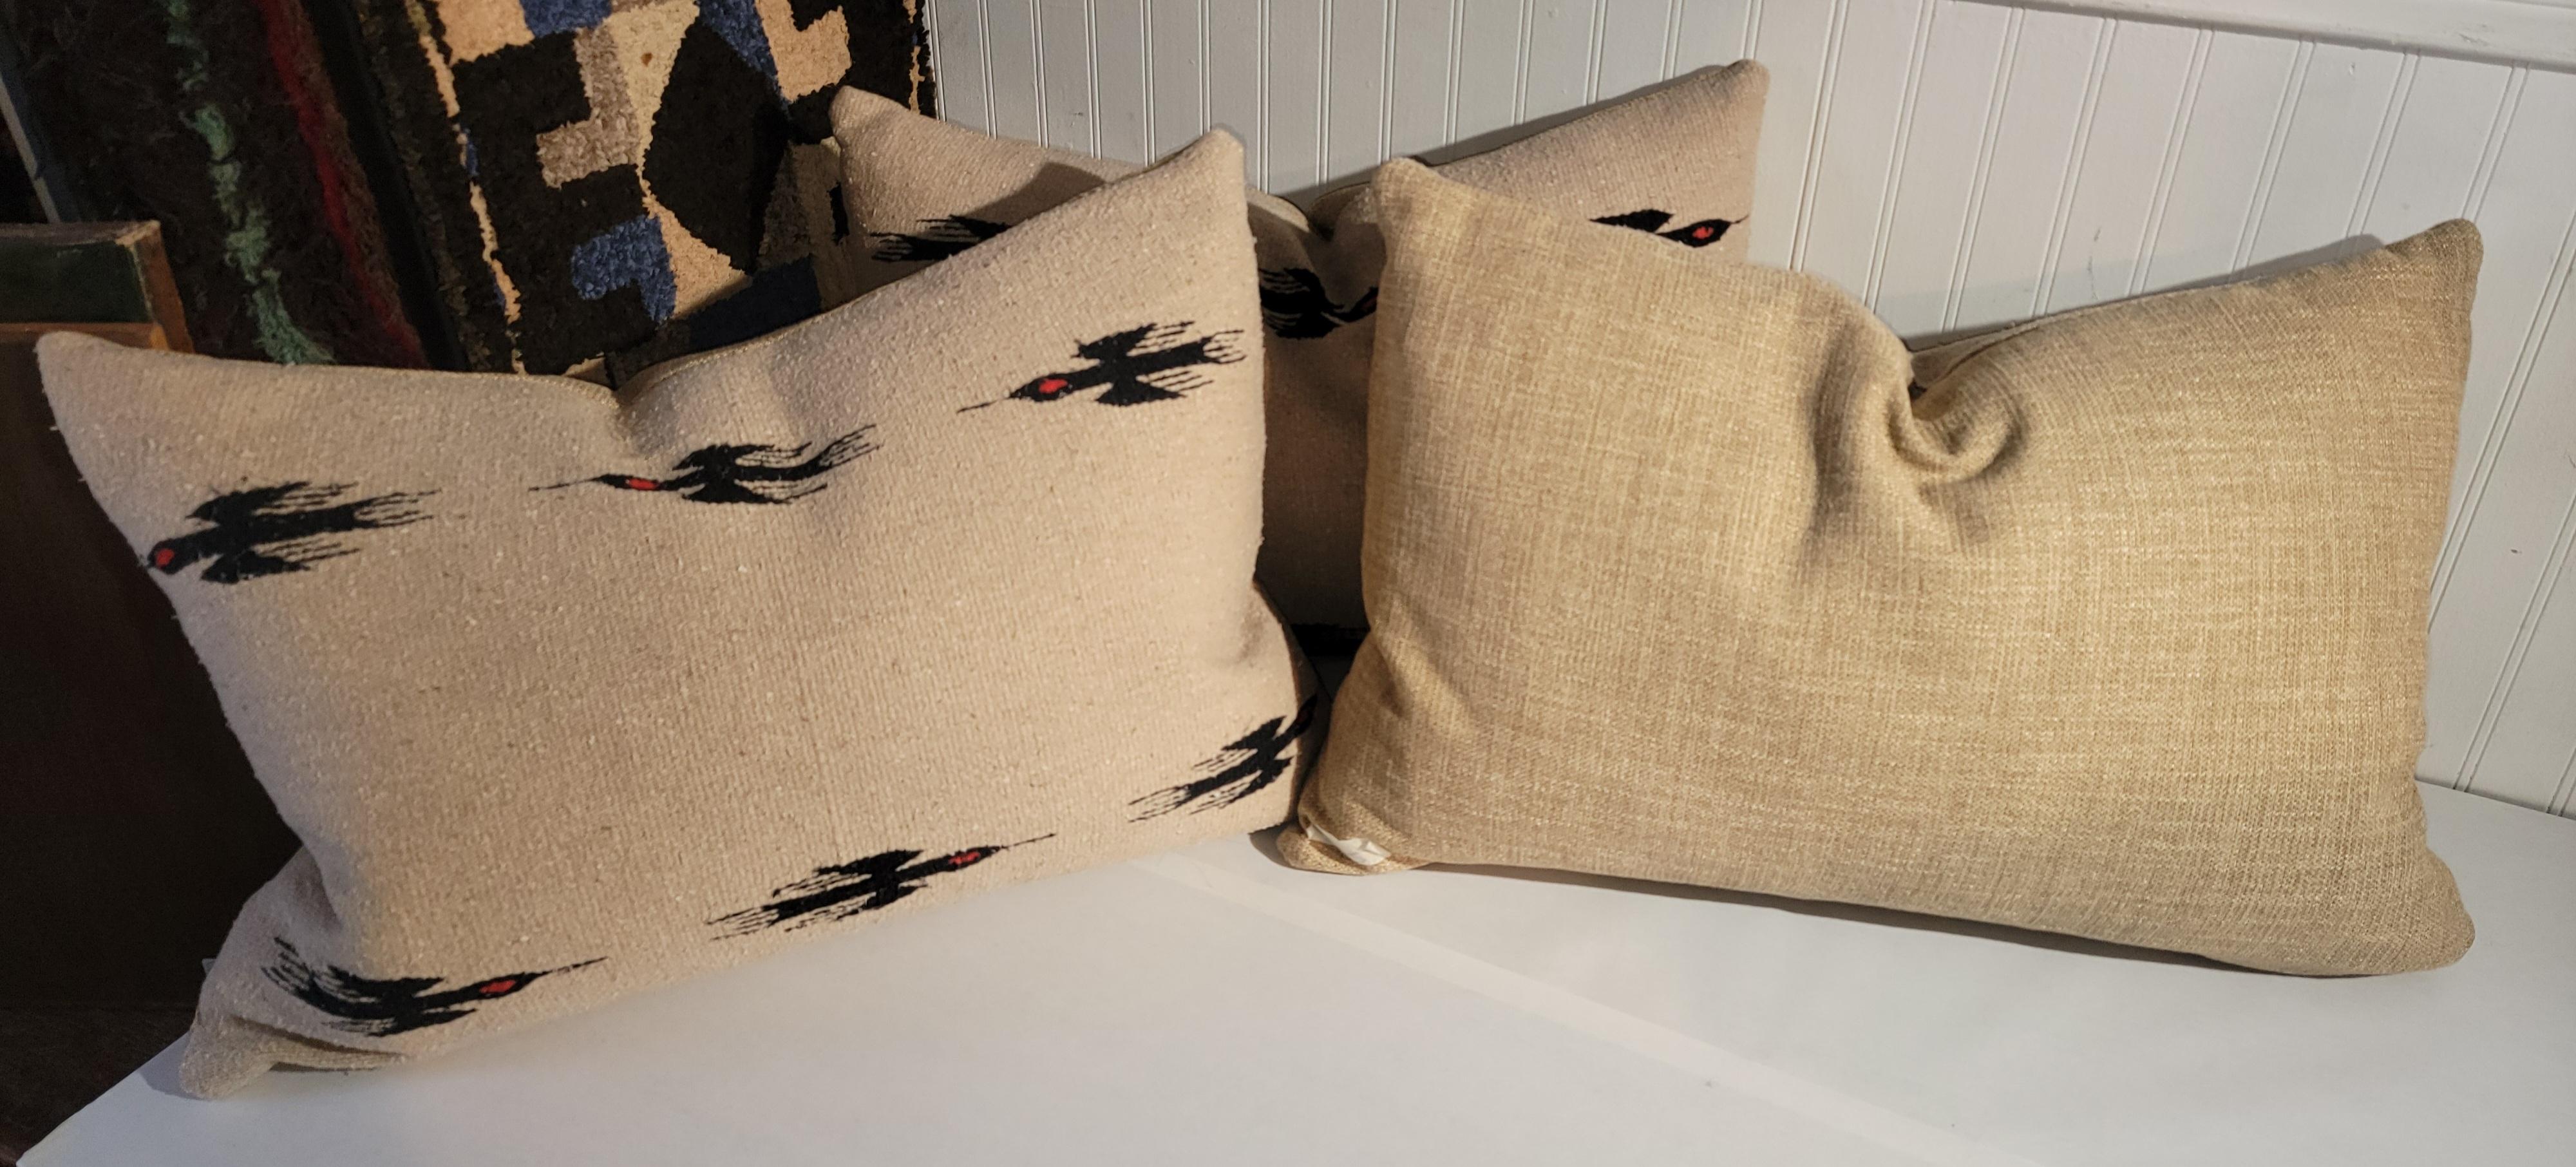 Adirondack Set of Three Beige and black Bird Pillows  For Sale